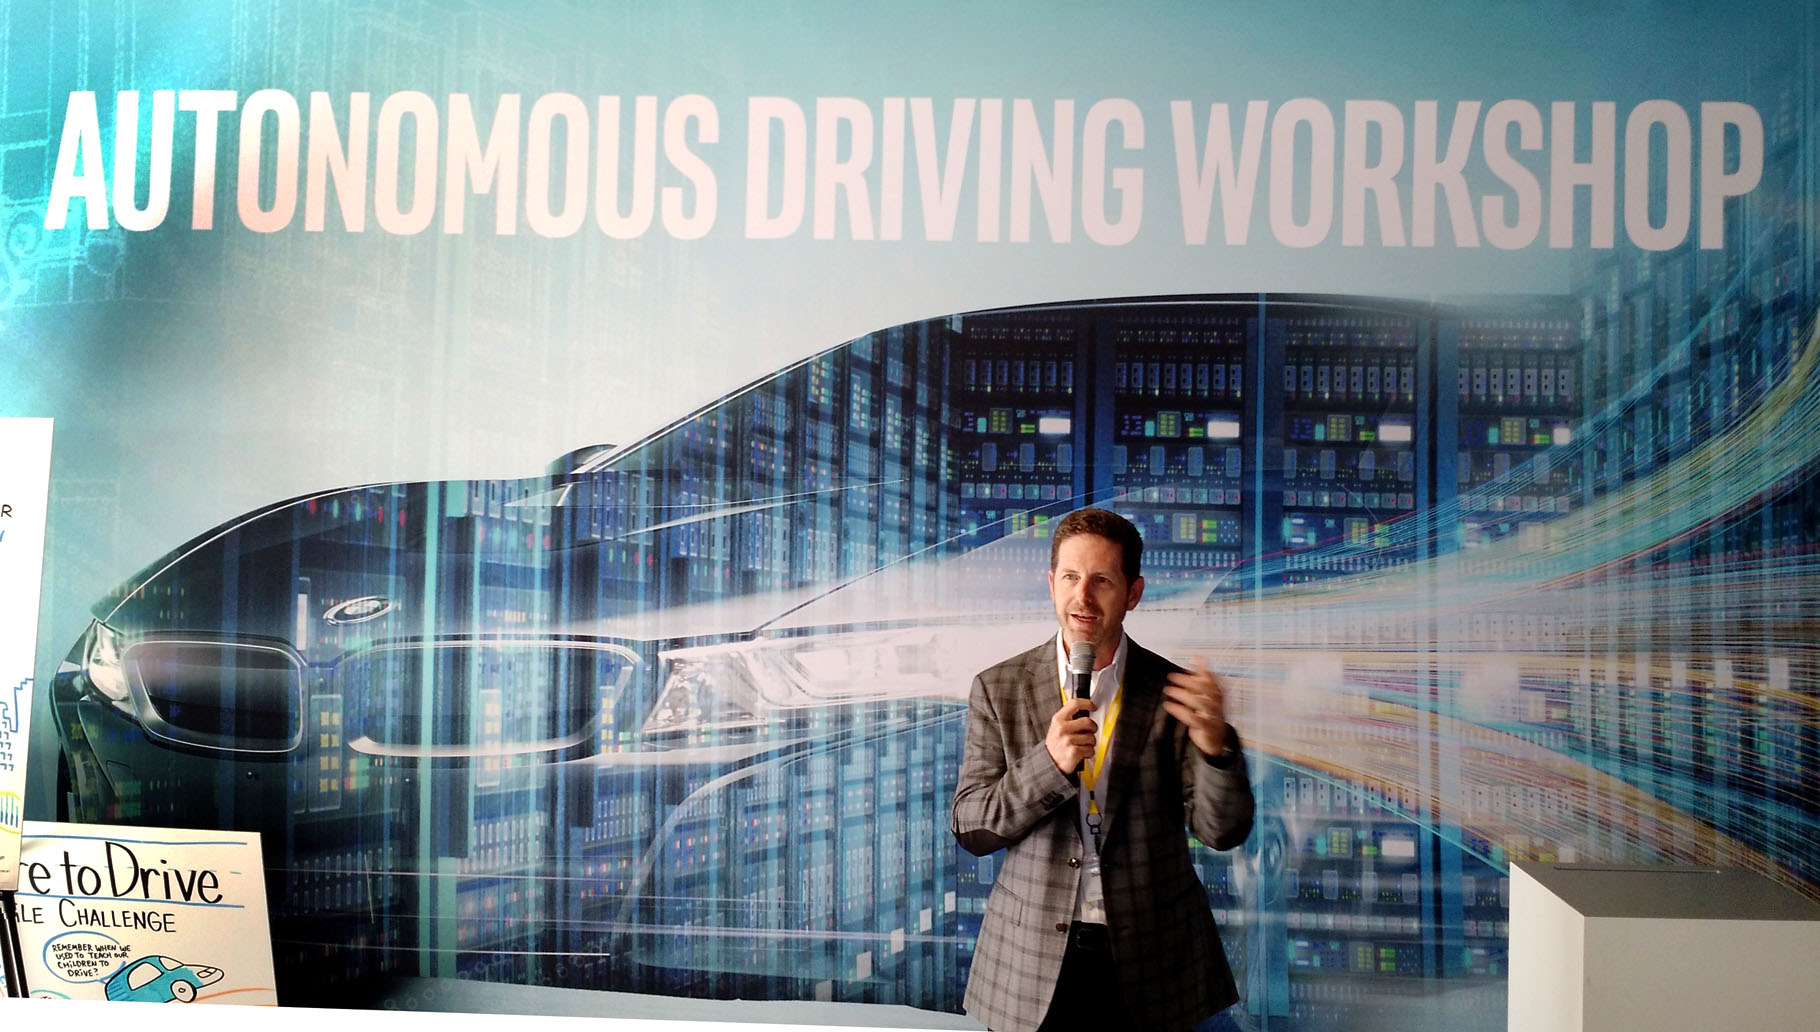 Doug Davis, Senior vice president and general manager of Intel’s Automated Driving Group, discusses his mission to bring Intel autonomous driving technology to the masses